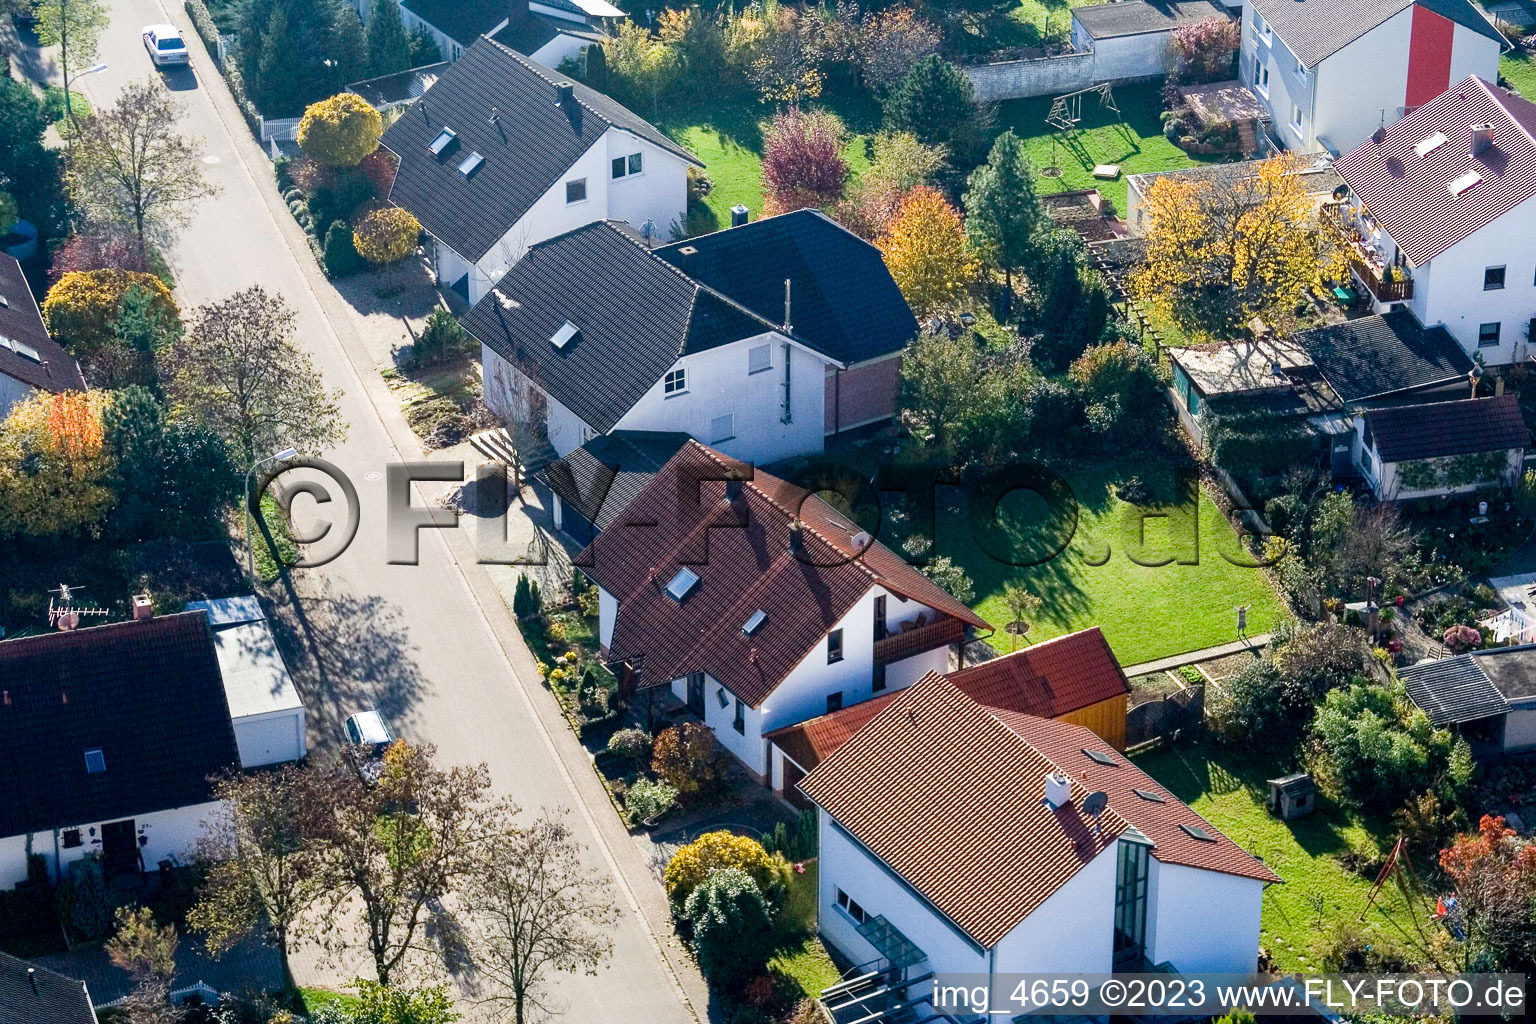 Klingbachstr in Steinweiler in the state Rhineland-Palatinate, Germany from the drone perspective